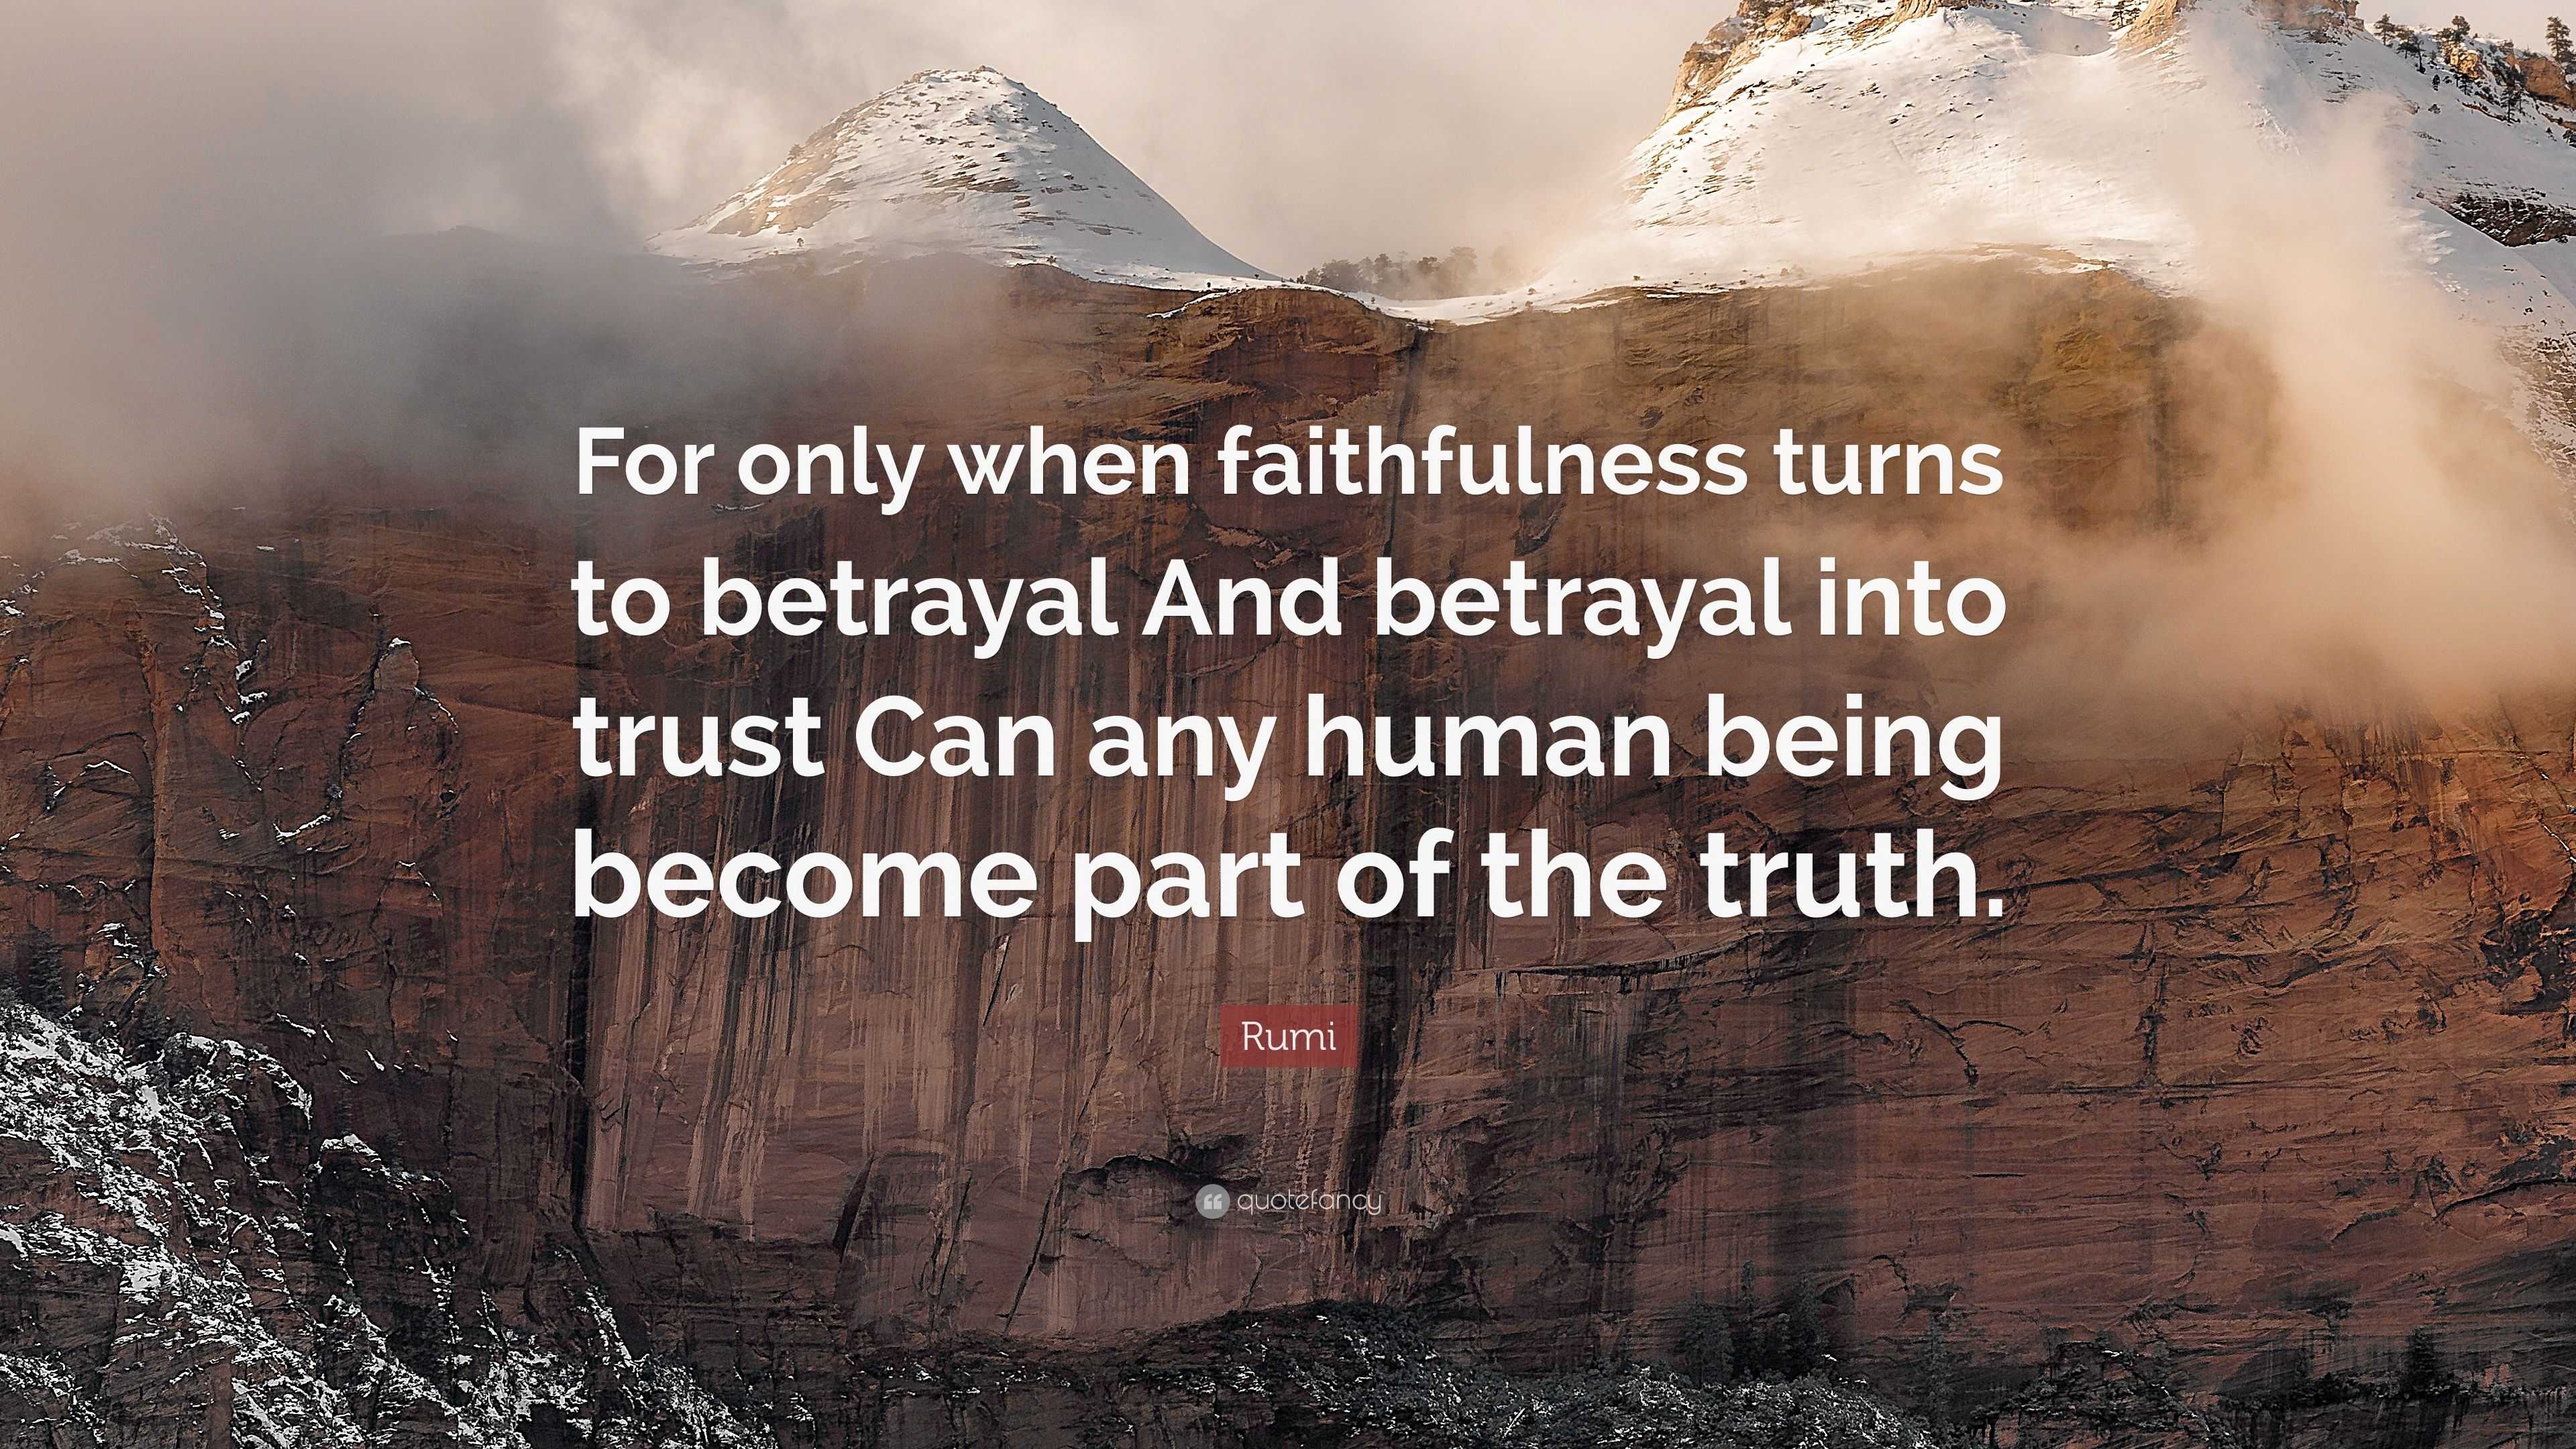 Rumi Quote “For only when faithfulness turns to betrayal And betrayal into trust Can